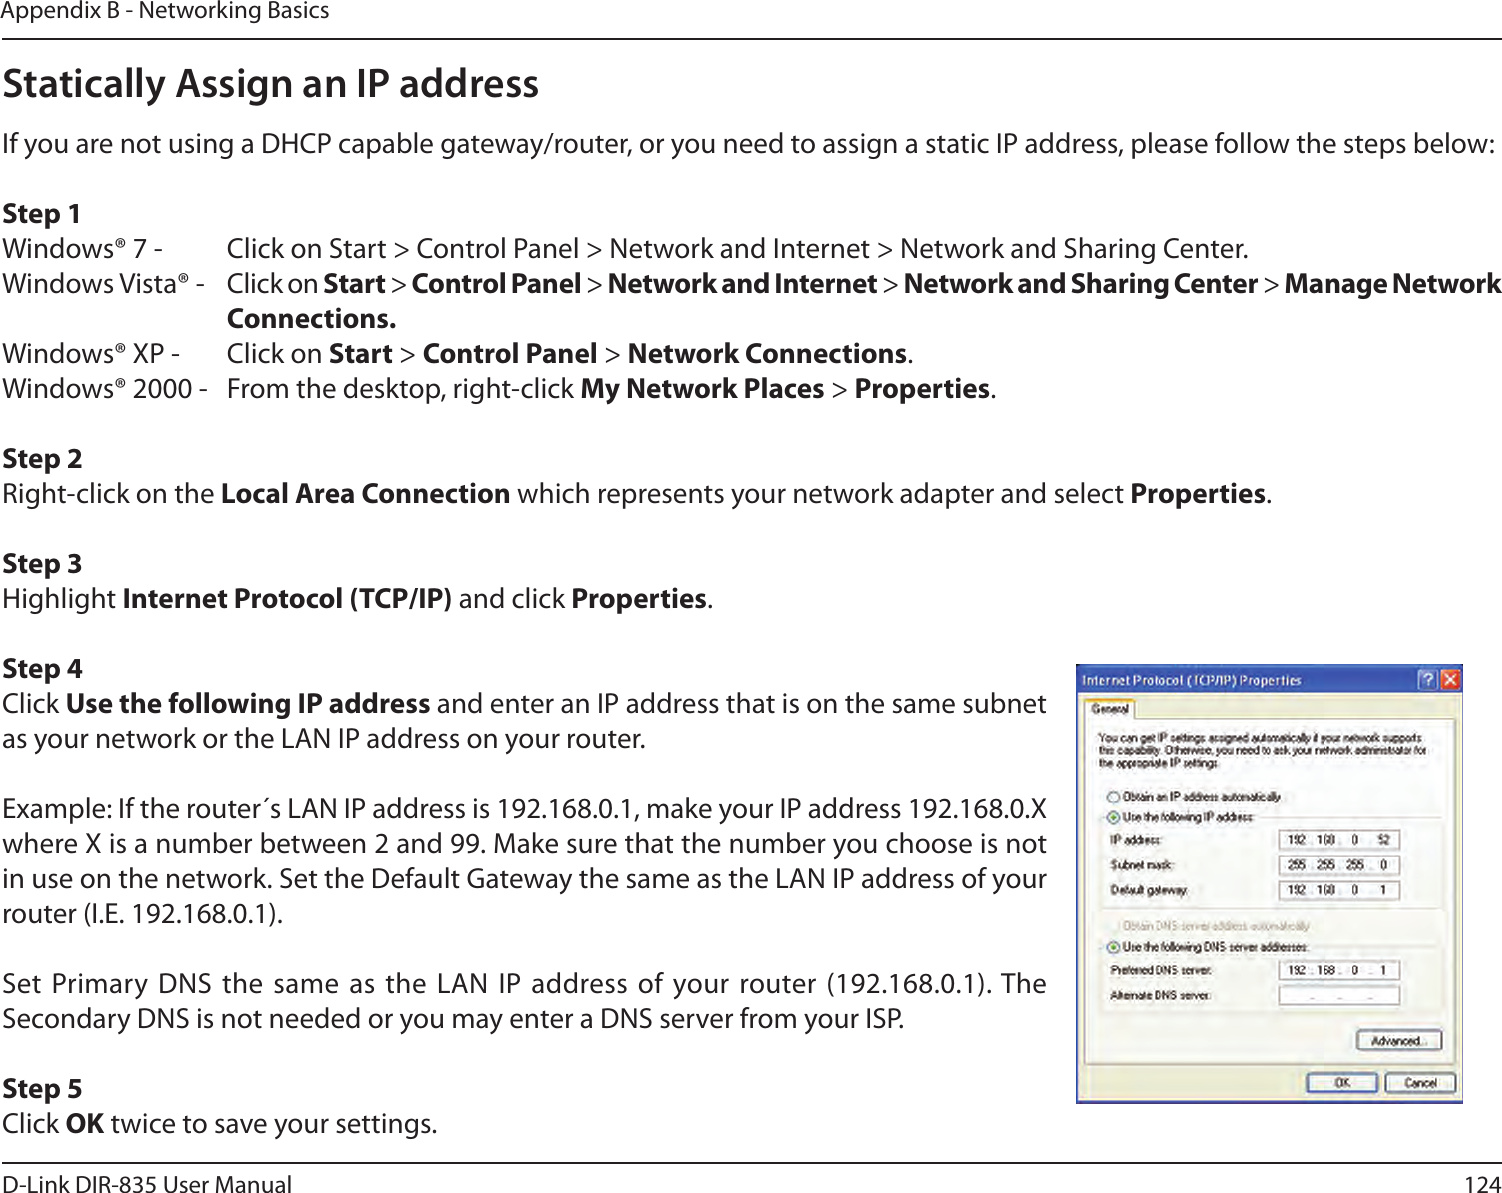 124D-Link DIR-835 User ManualAppendix B - Networking BasicsStatically Assign an IP addressIf you are not using a DHCP capable gateway/router, or you need to assign a static IP address, please follow the steps below:Step 1Windows® 7 -  Click on Start &gt; Control Panel &gt; Network and Internet &gt; Network and Sharing Center.Windows Vista® -  Click on Start &gt; Control Panel &gt; Network and Internet &gt; Network and Sharing Center &gt; Manage Network      Connections.Windows® XP -  Click on Start &gt; Control Panel &gt; Network Connections.Windows® 2000 -  From the desktop, right-click My Network Places &gt; Properties.Step 2Right-click on the Local Area Connection which represents your network adapter and select Properties.Step 3Highlight InternetProtocol(TCP/IP) and click Properties.Step 4Click Use the following IP address and enter an IP address that is on the same subnet as your network or the LAN IP address on your router. Example: If the router´s LAN IP address is 192.168.0.1, make your IP address 192.168.0.X where X is a number between 2 and 99. Make sure that the number you choose is not in use on the network. Set the Default Gateway the same as the LAN IP address of your router (I.E. 192.168.0.1). Set Primary DNS the  same as the  LAN IP address of  your router (192.168.0.1). The Secondary DNS is not needed or you may enter a DNS server from your ISP.Step 5Click OK twice to save your settings.